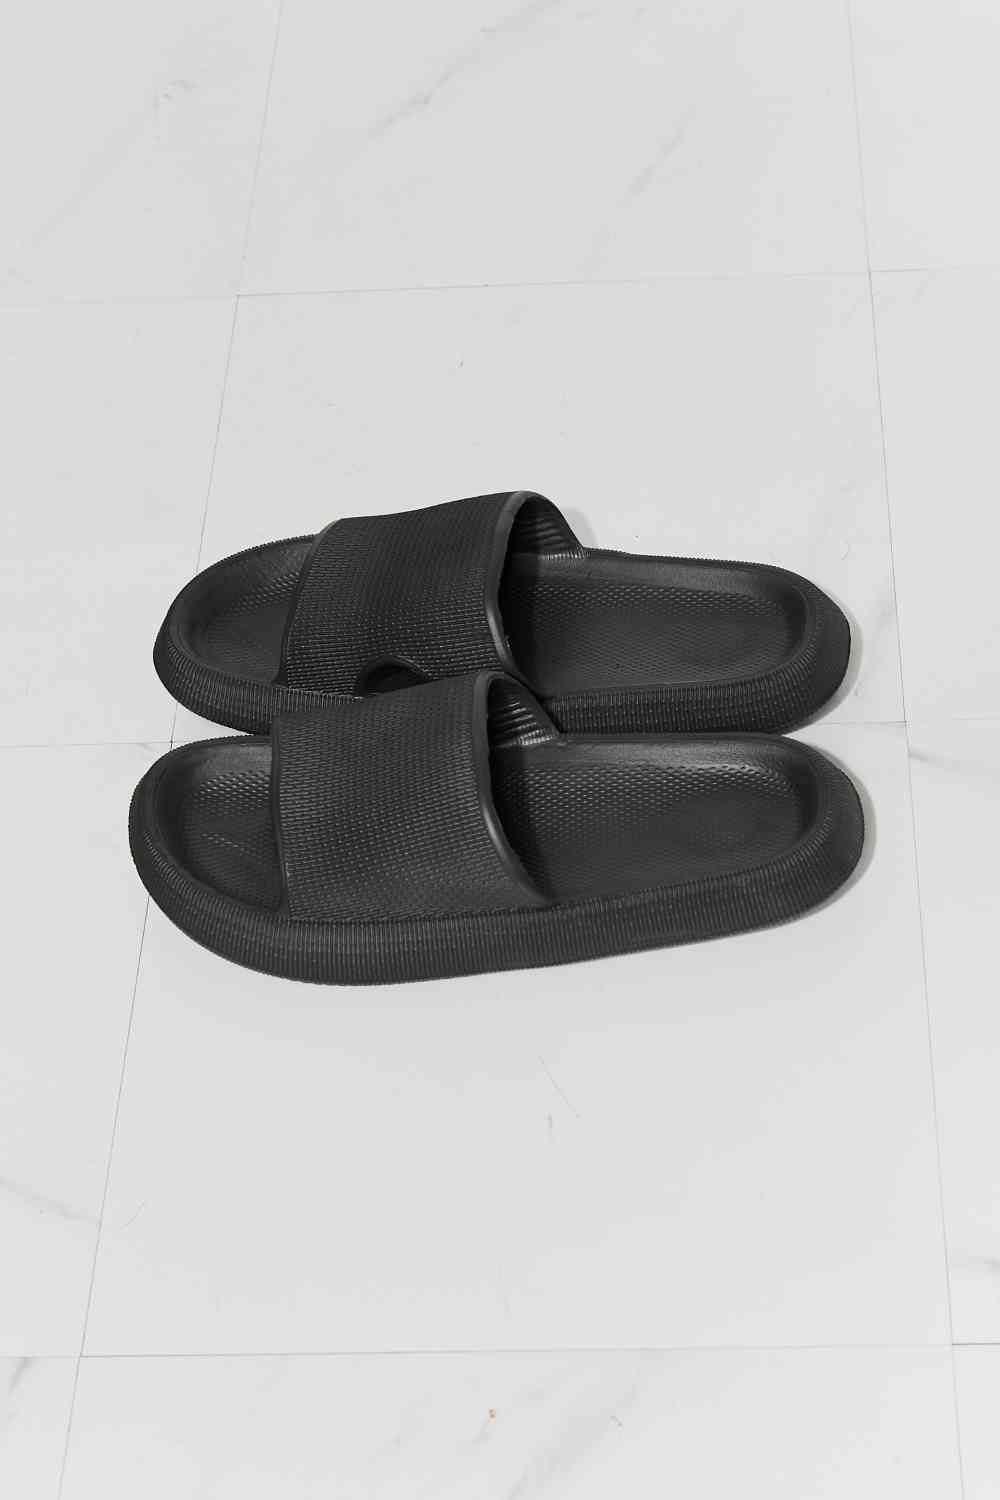 Arms Around Me Open Toe Slide in Black - Accessories - Shoes - 6 - 2024